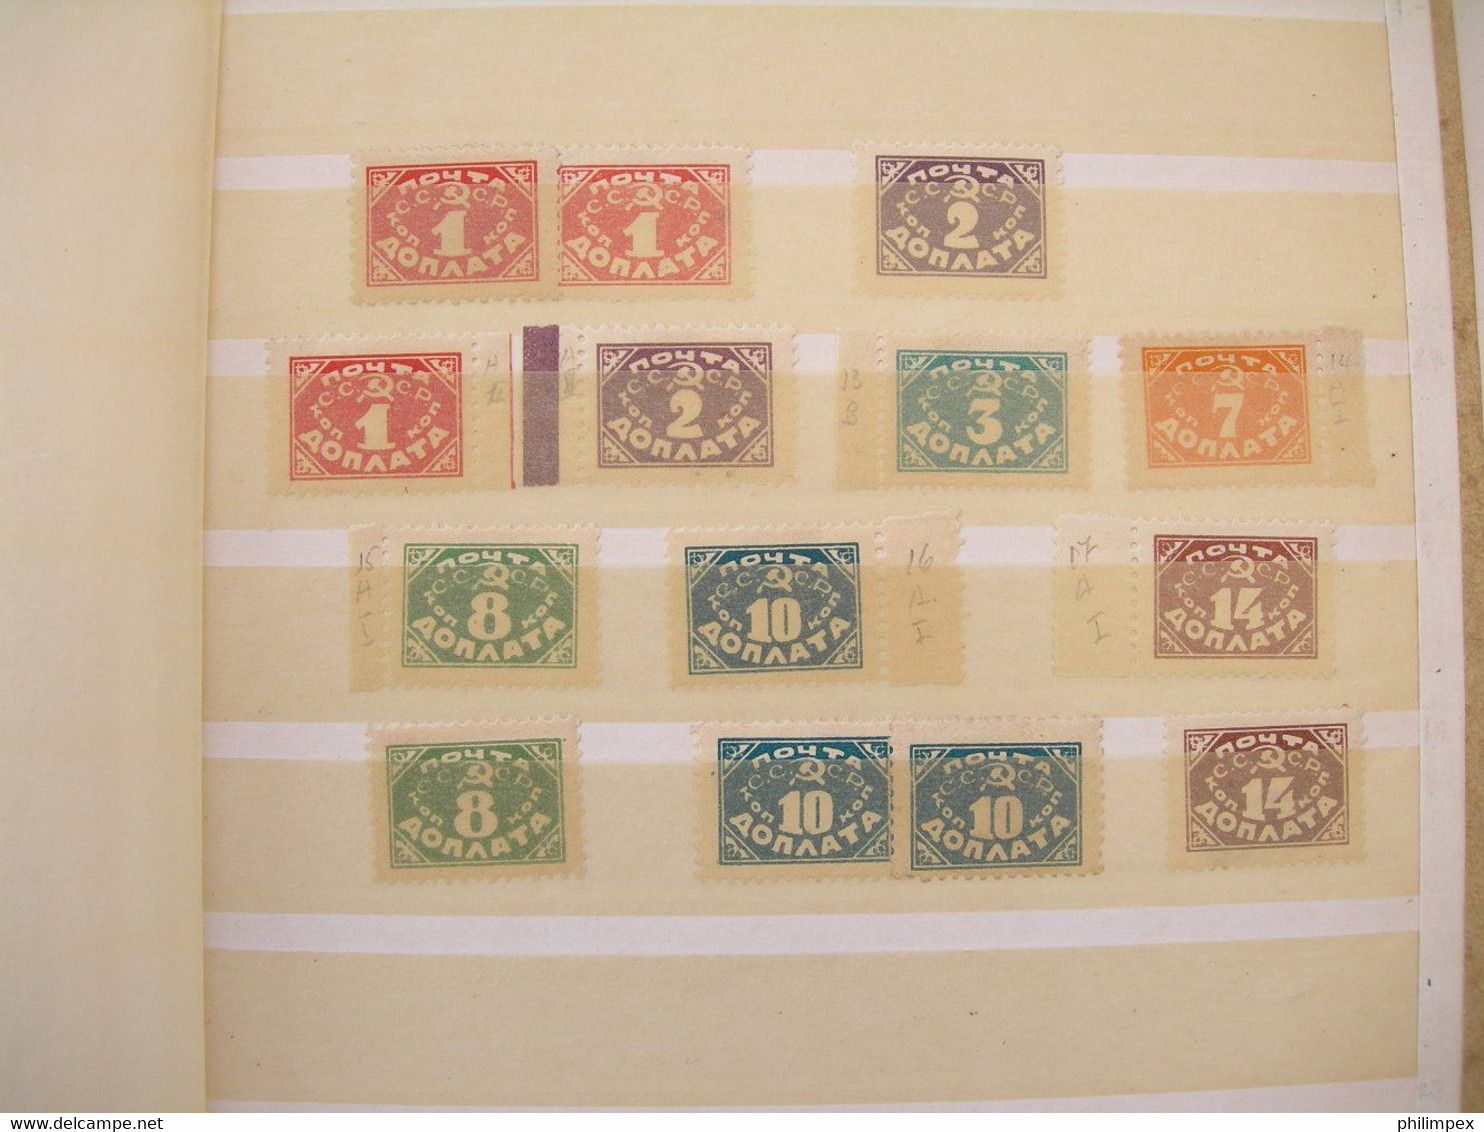 RUSSIA, MOSTLY DEFINITIVES USED IN STOCK BOOK CV!